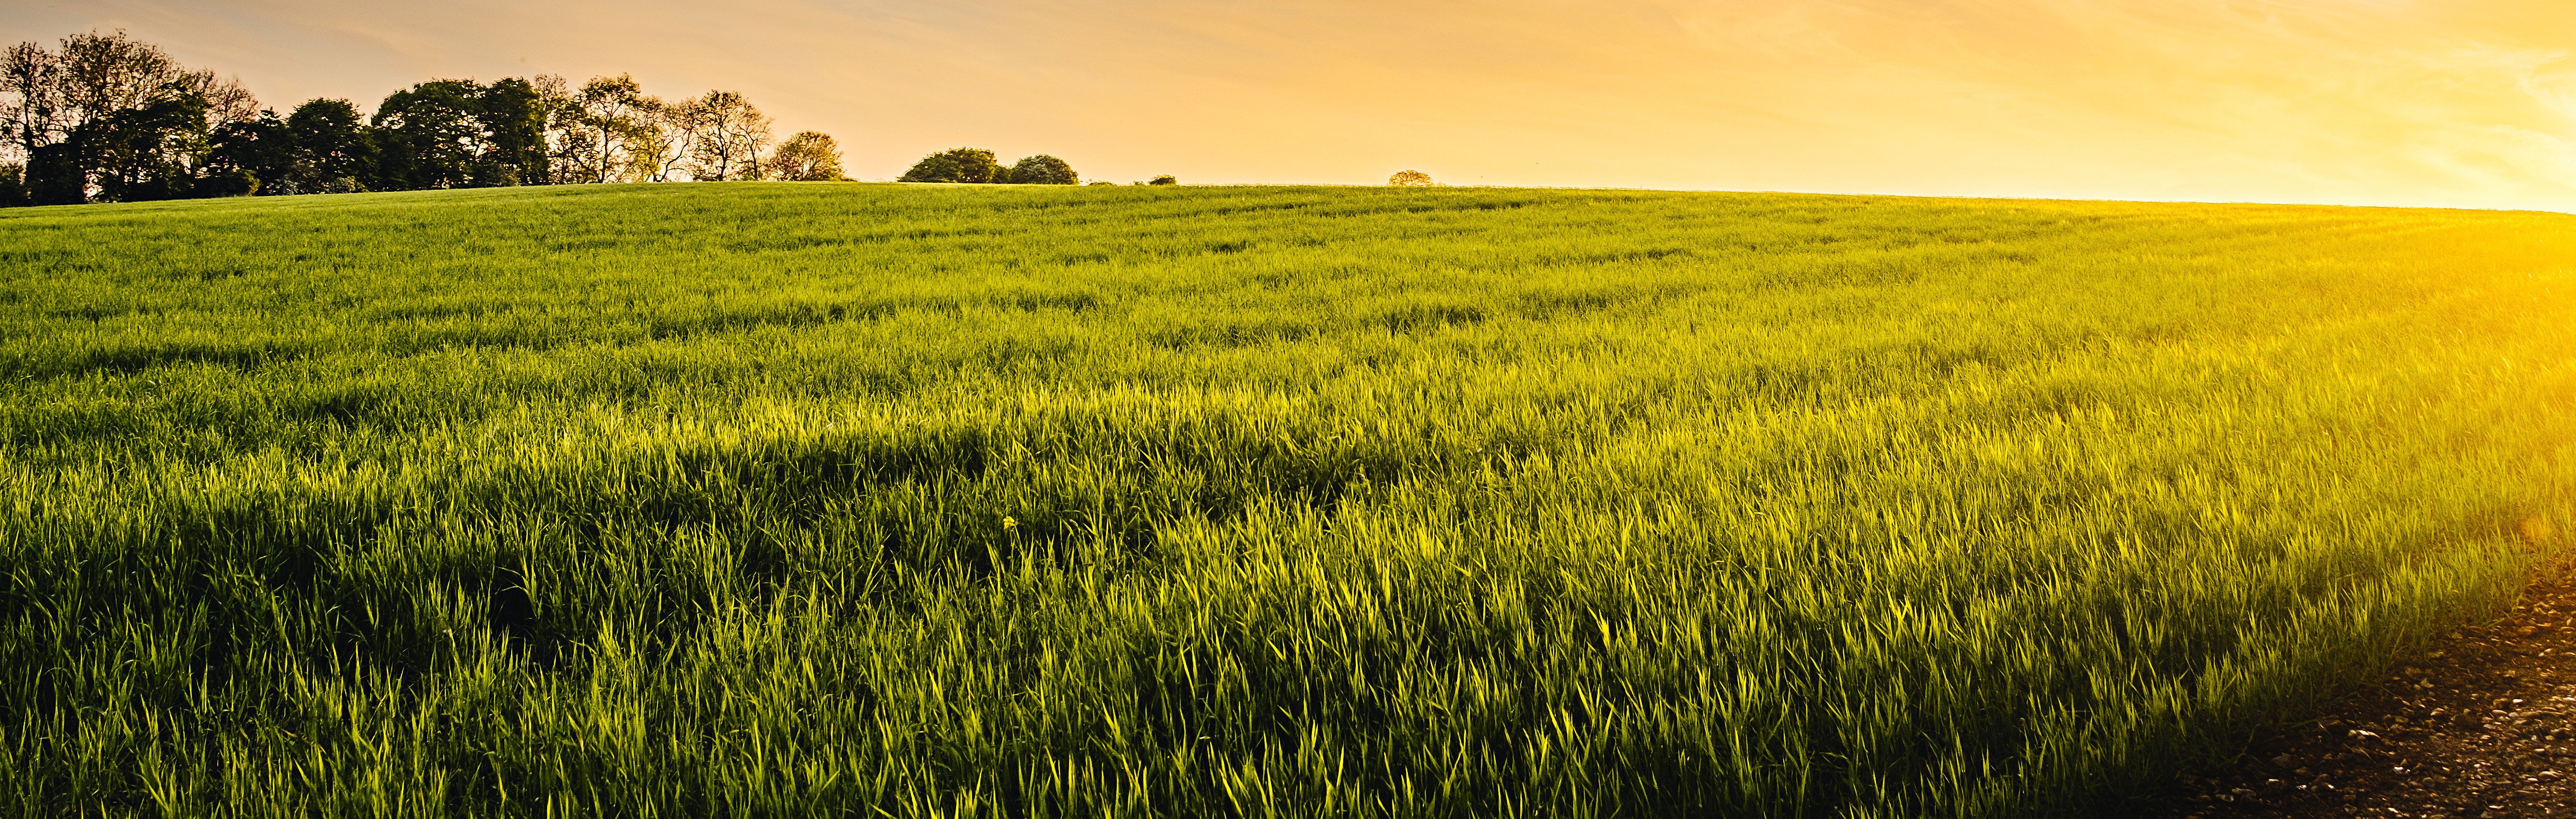 A wide view of a green wheat field under the warm bath of the sun